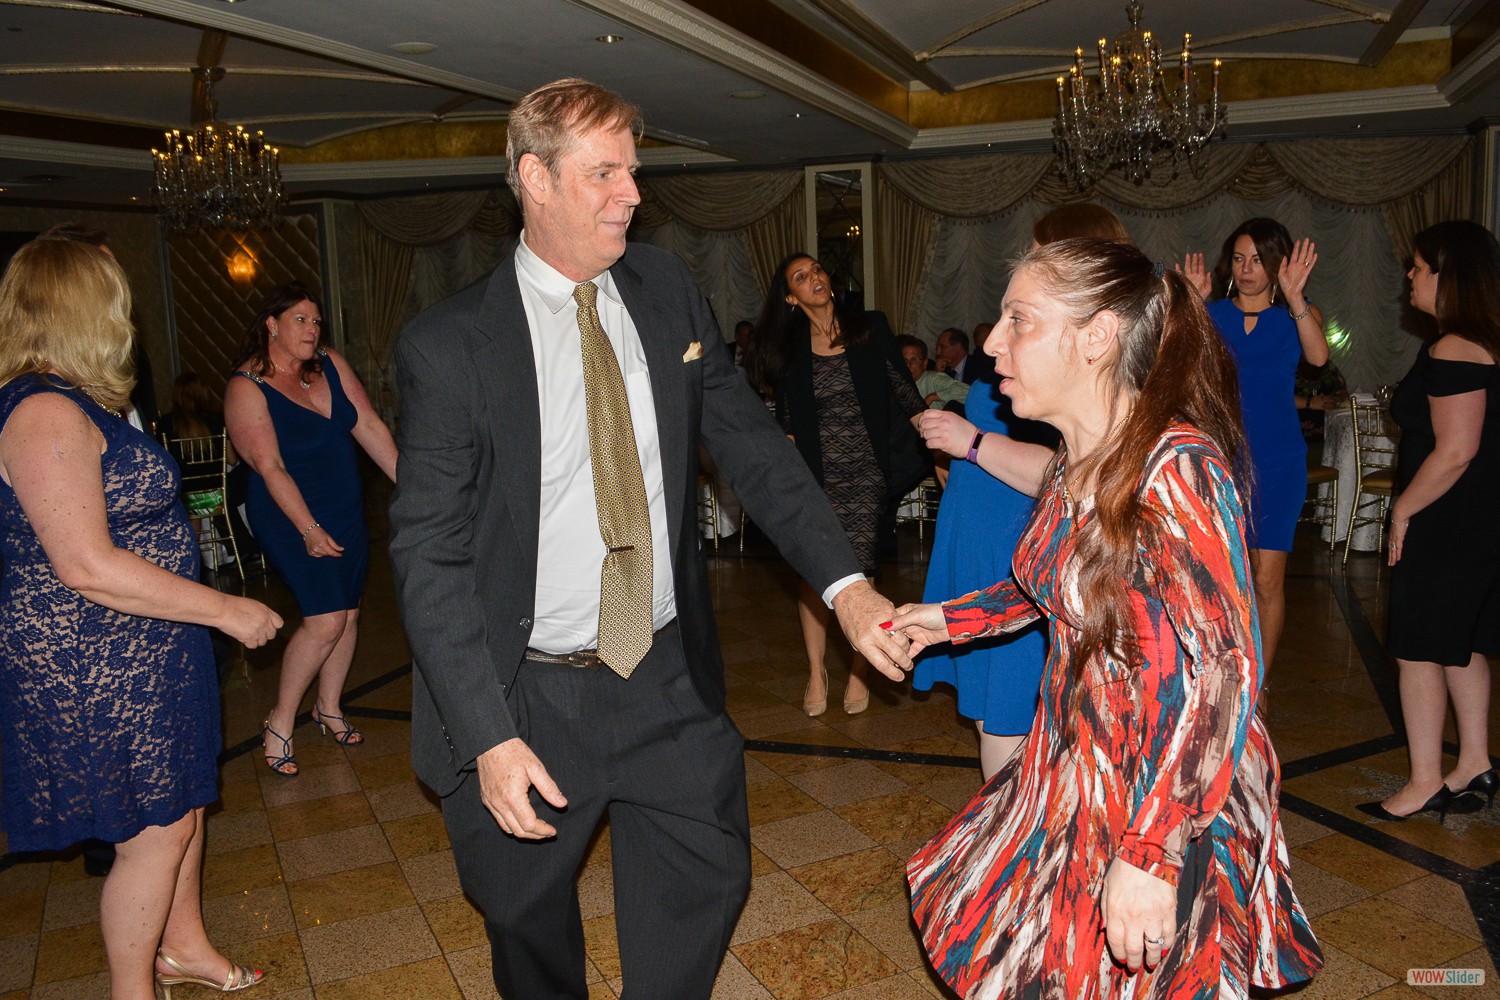 Chapter Past President Andriette Matthews joins spouse Paul for a dance.